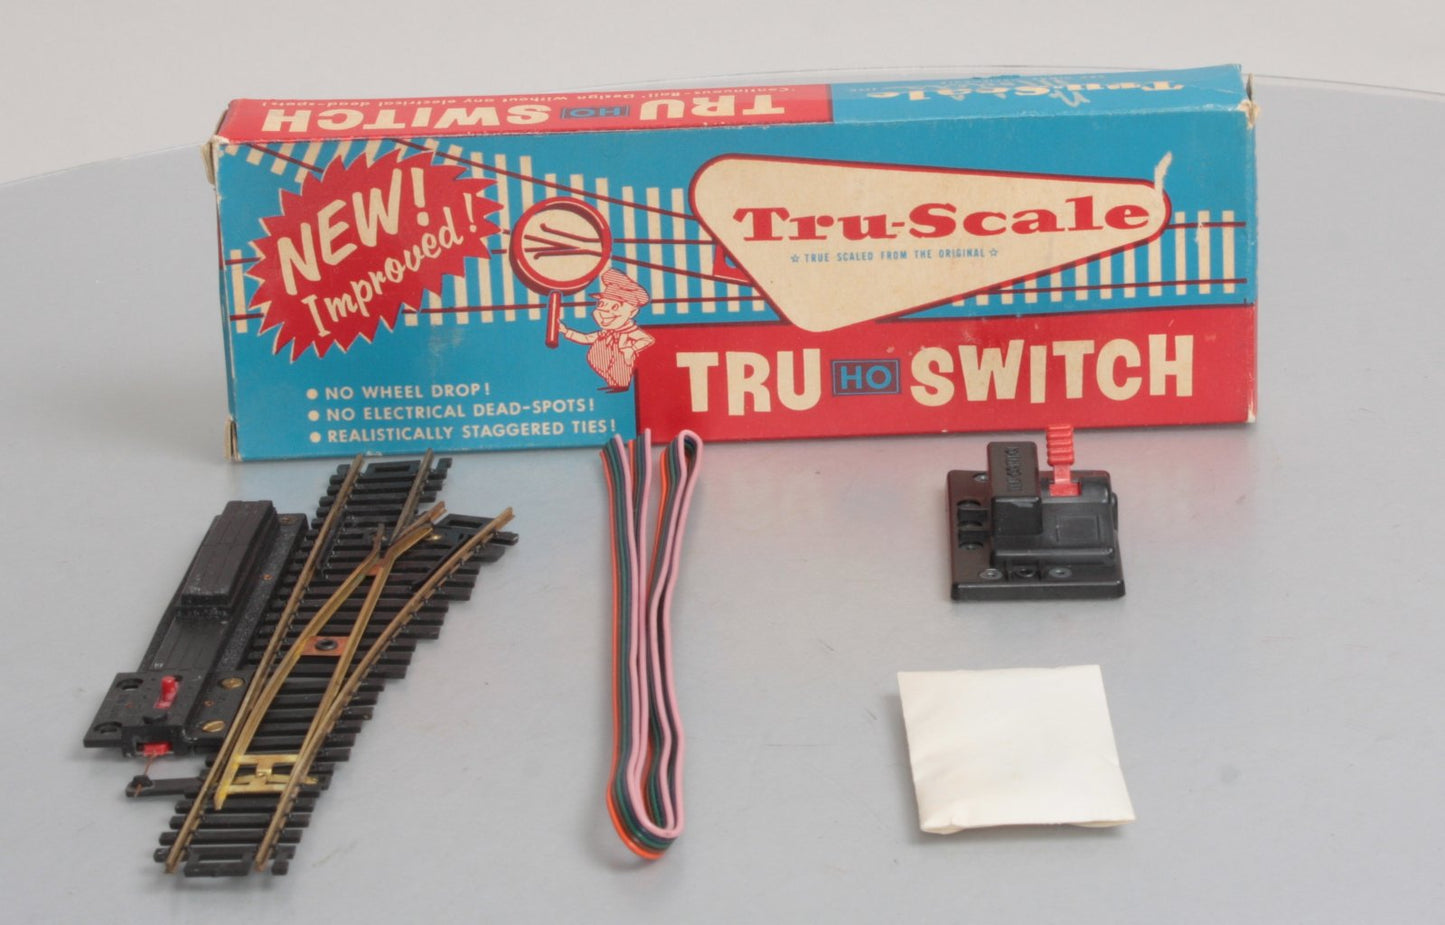 Tru-Scale 1761-495 HO Remote Right Hand Switch with Indicator Lights